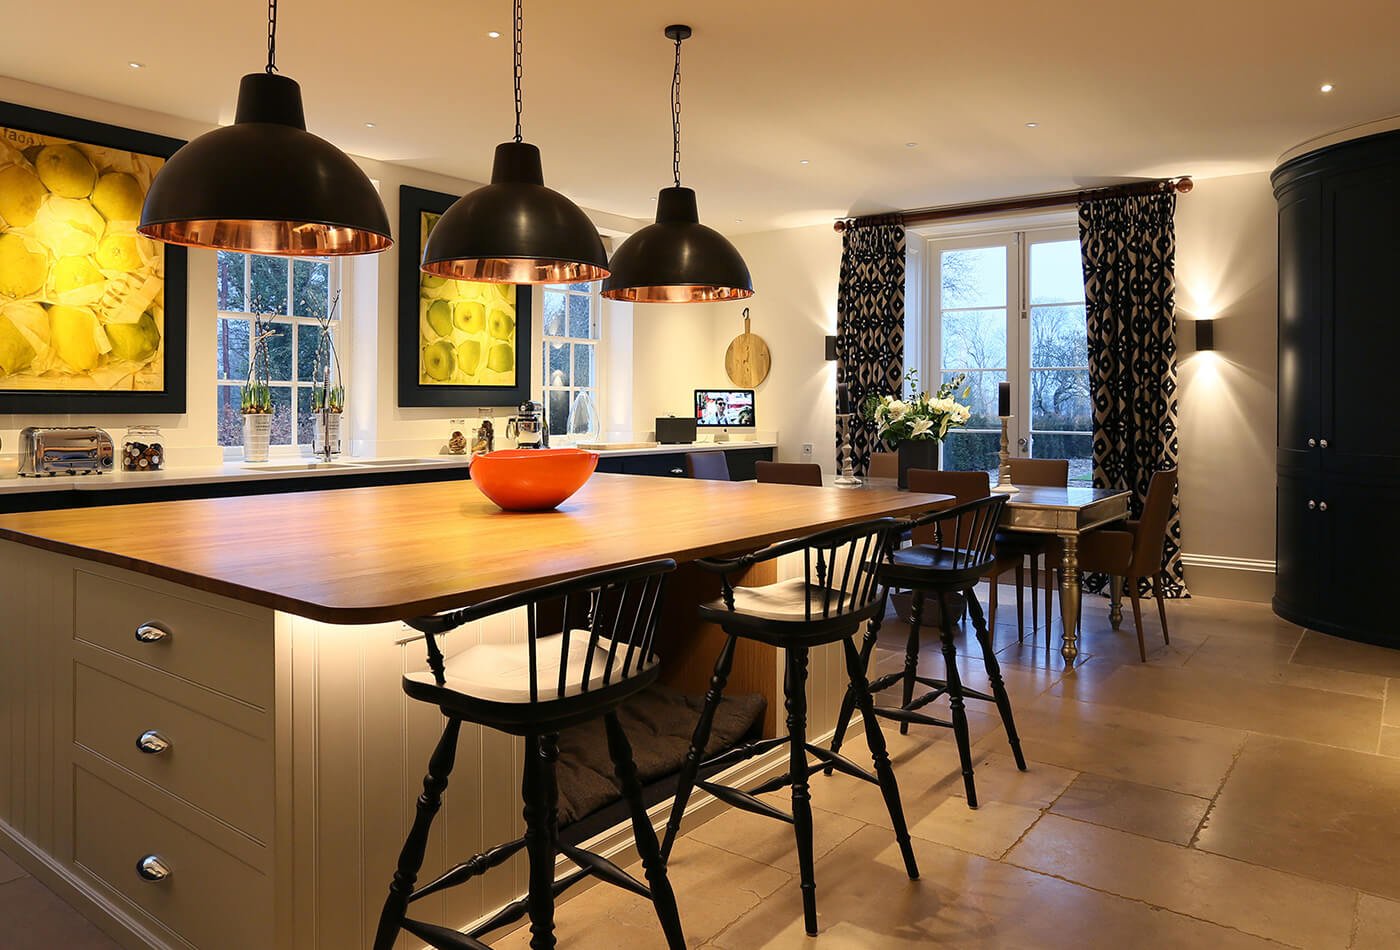 Bright Kitchen Is Obligatory! Can We Agree?